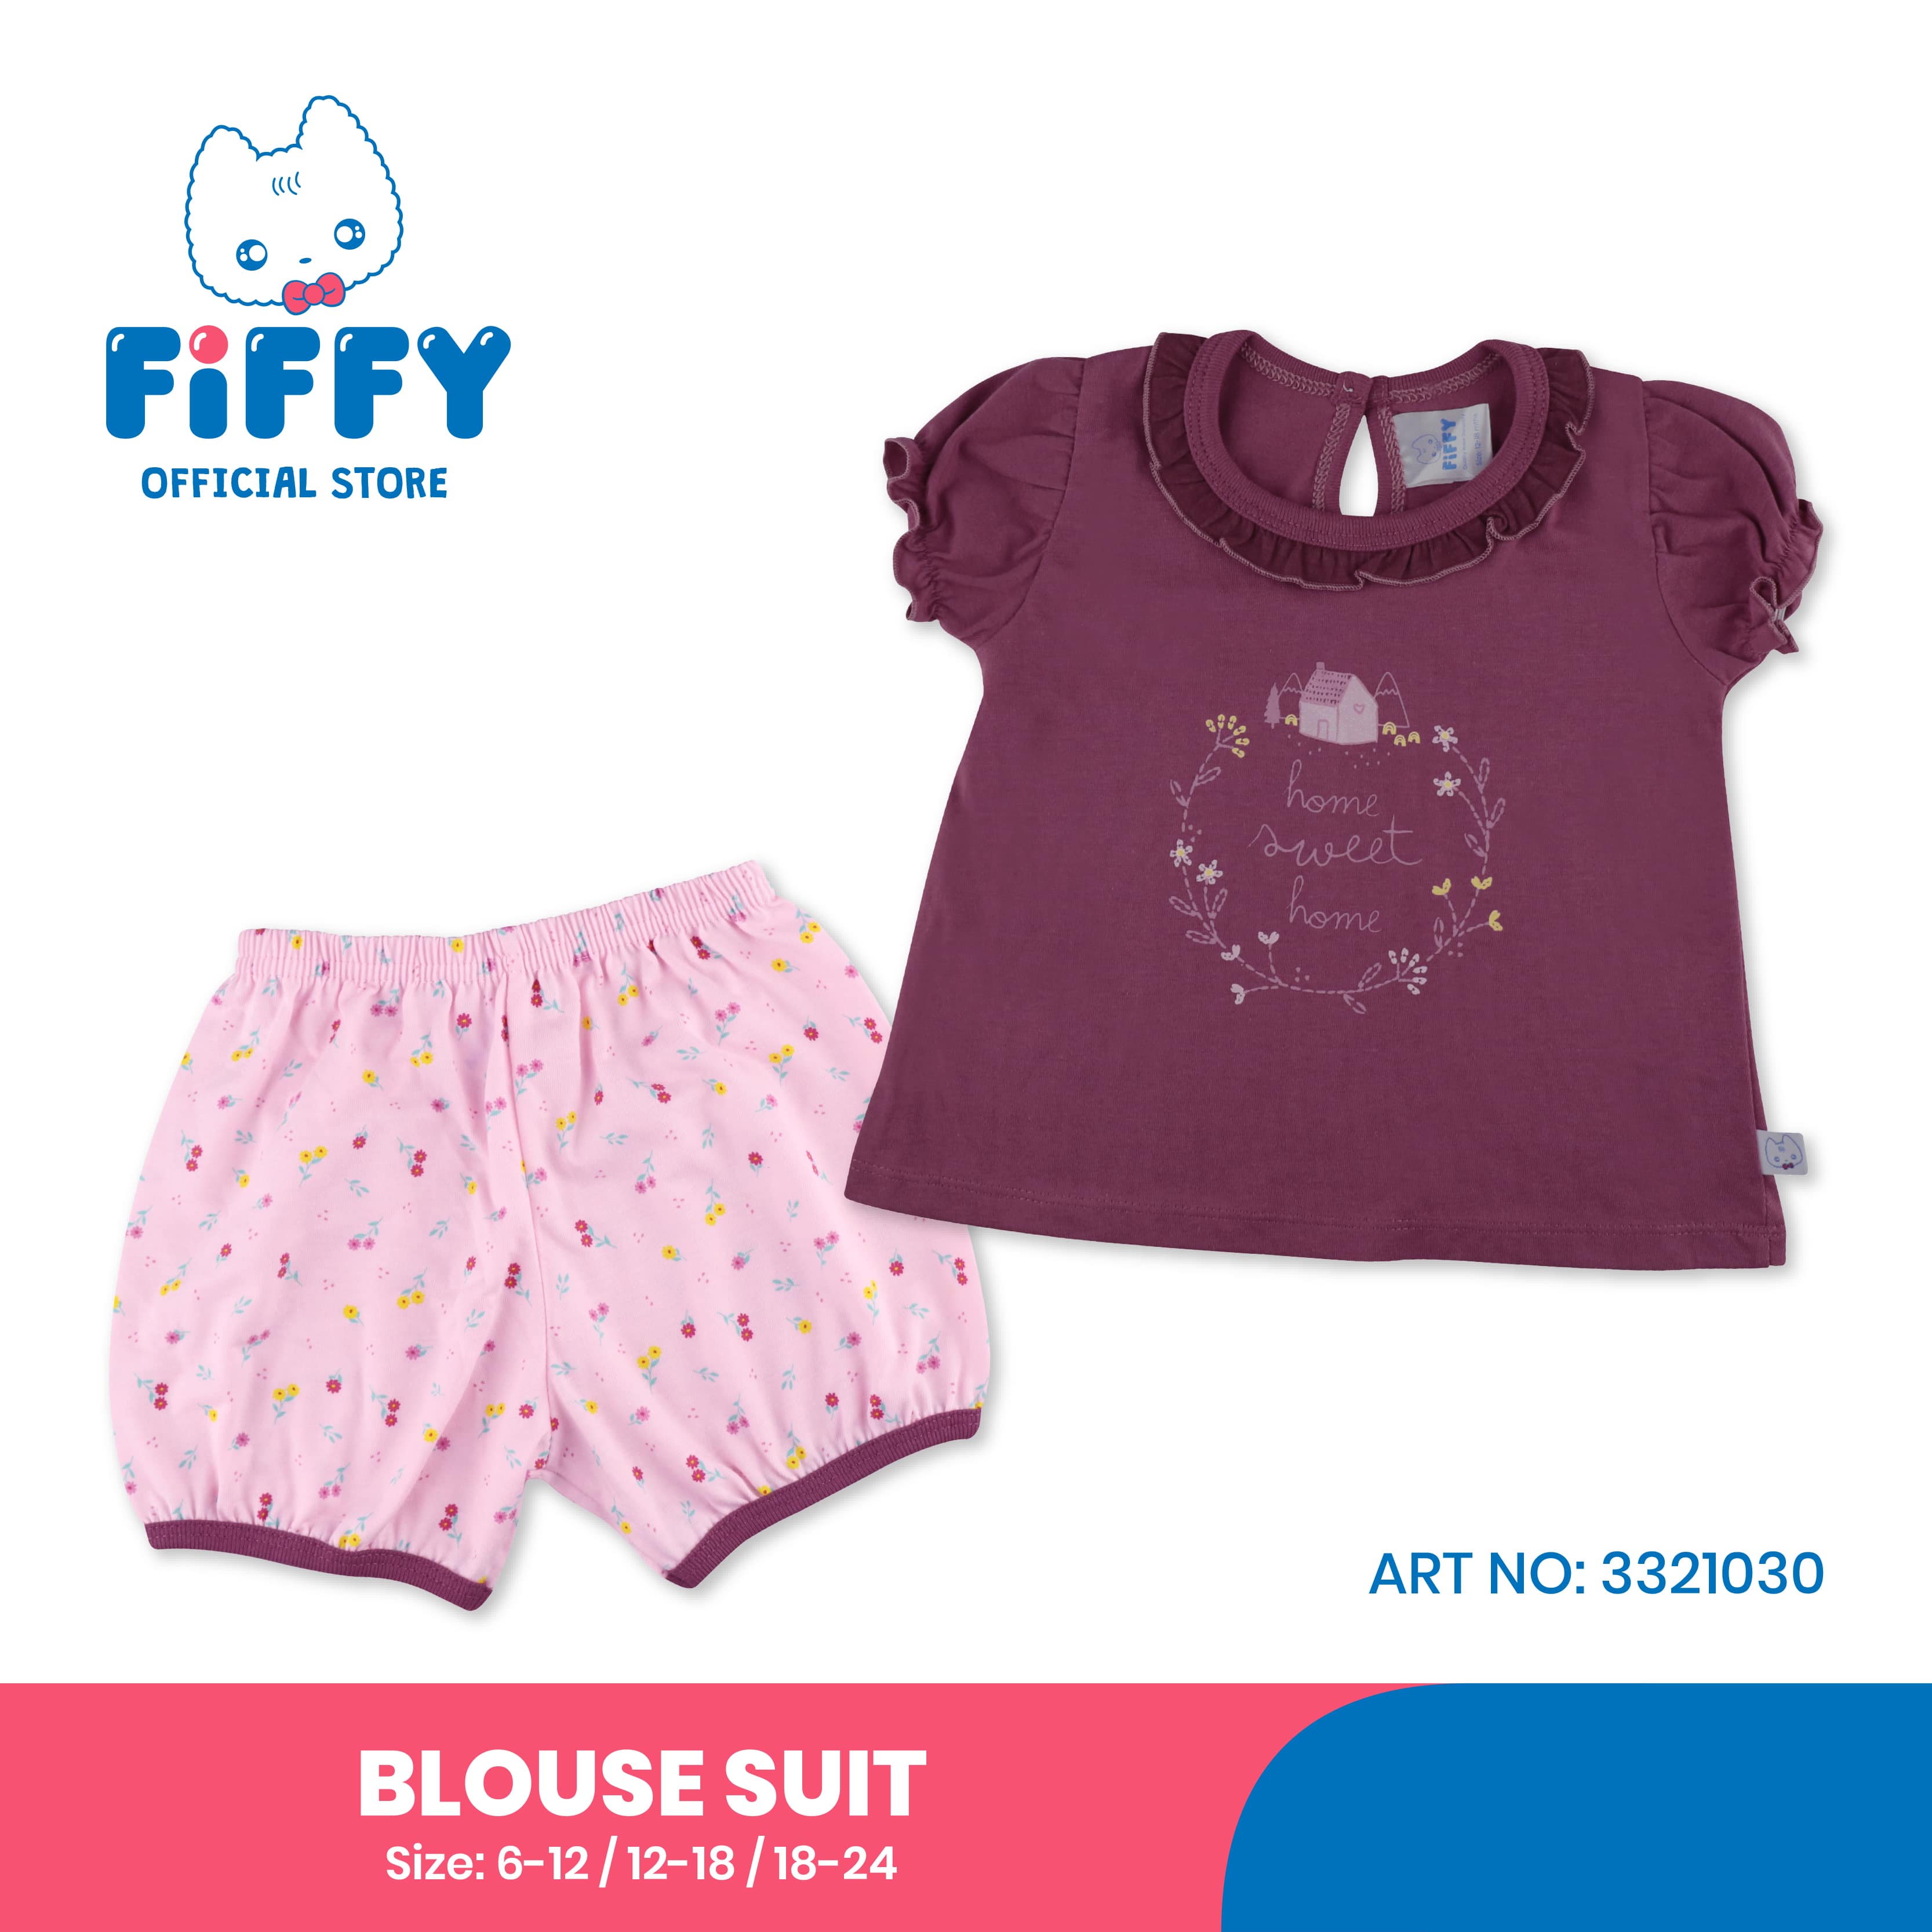 FIFFY A SWEET WAY BLOUSE SUIT